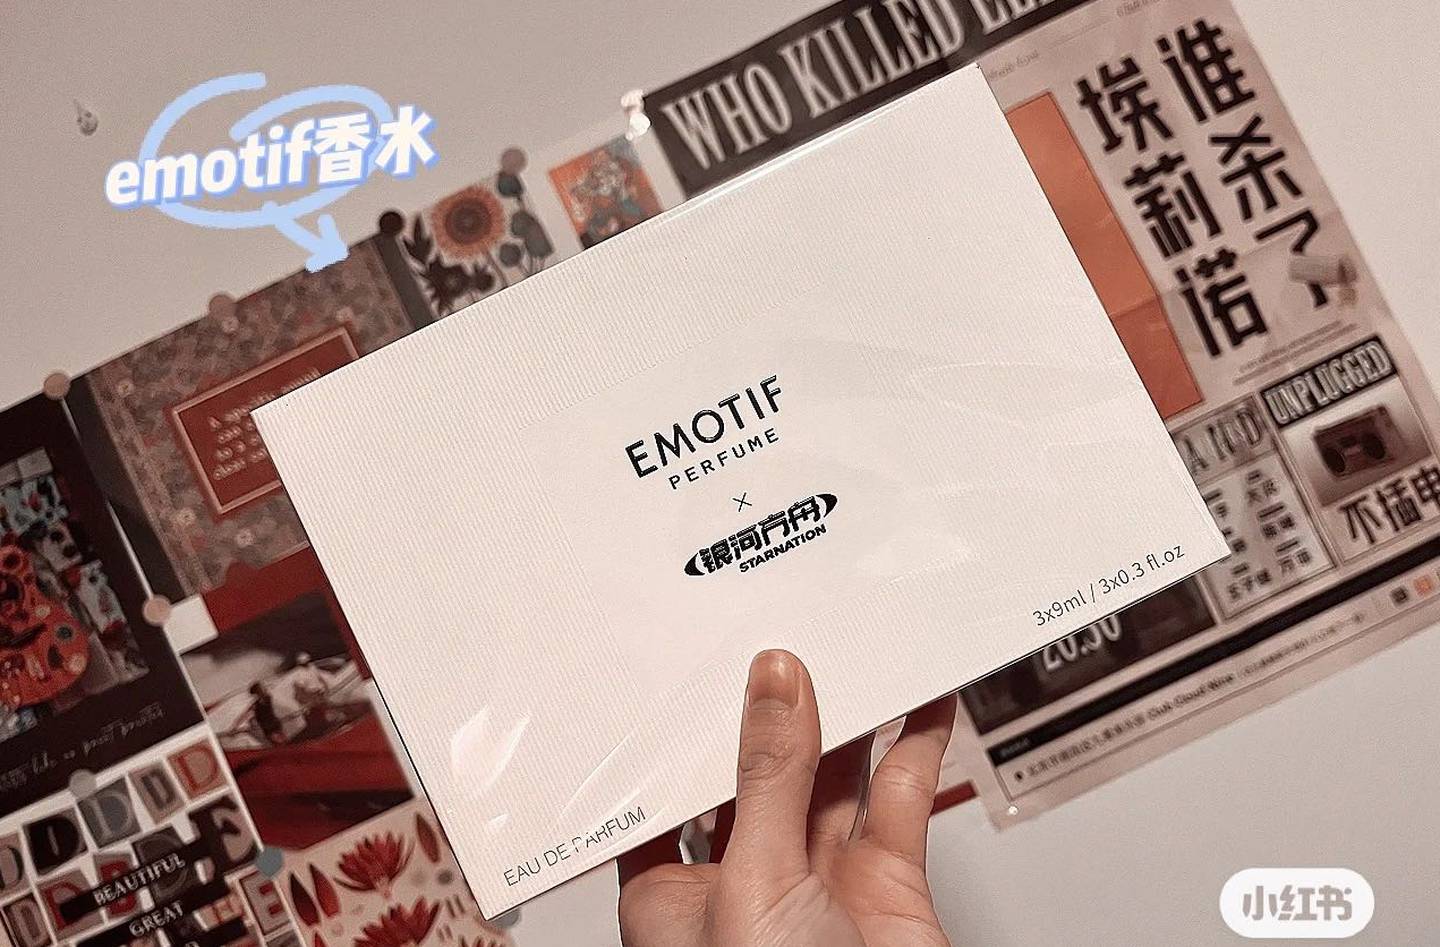 Xiaohongshu user @大狒狒爱泡澡 shows off the packaging of Emotif perfumes, developed by a Bytedance subsidiary.